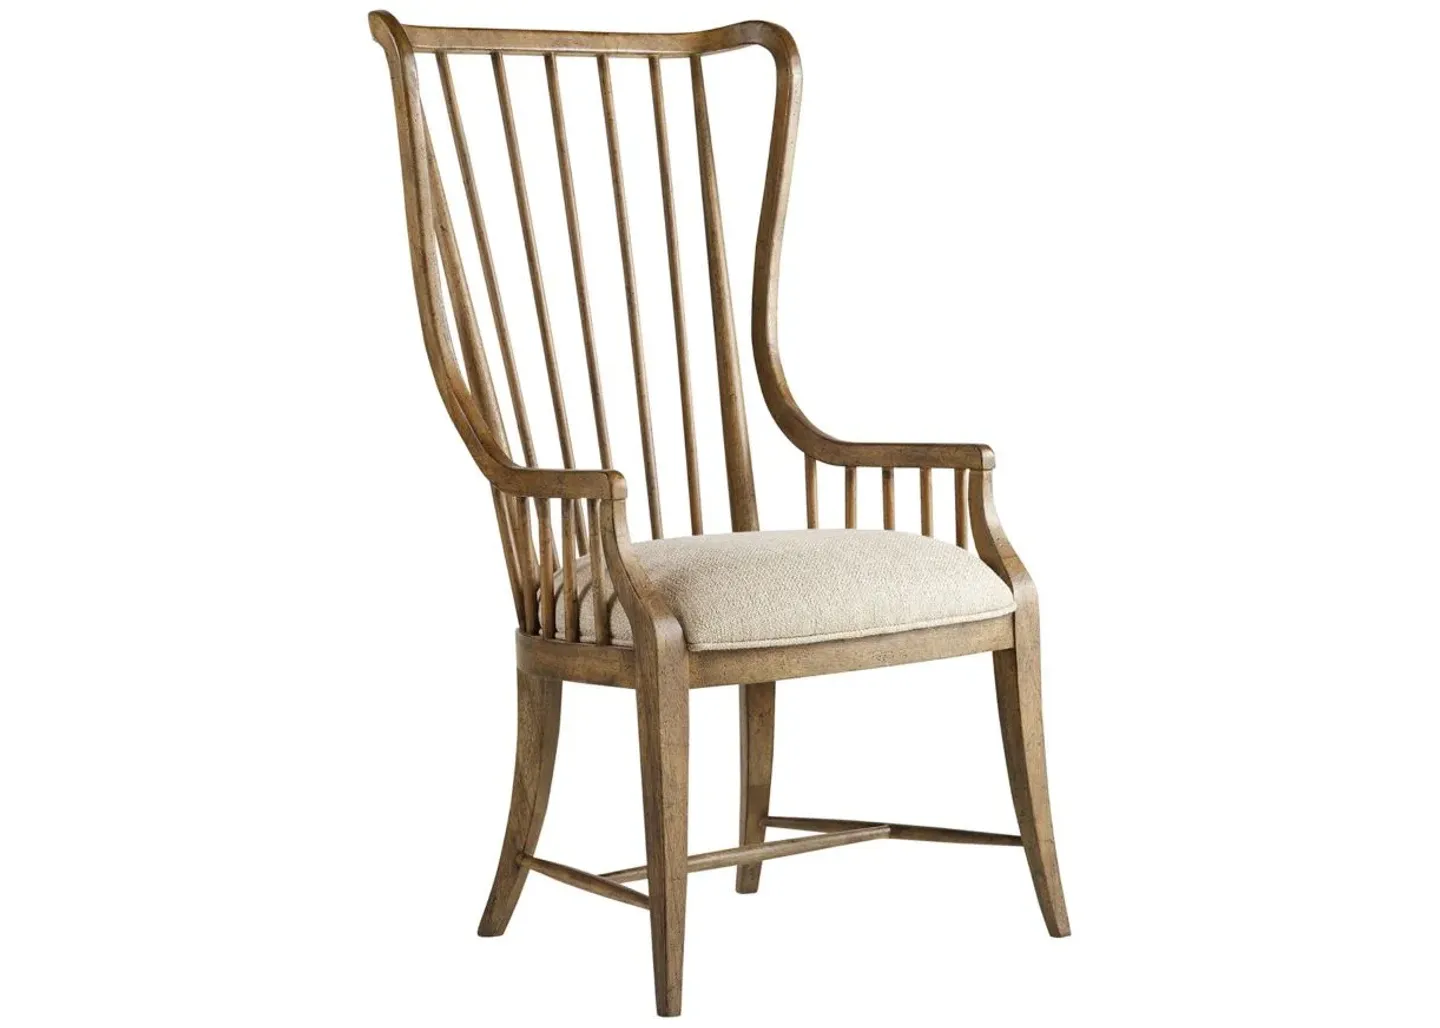 Hooker Furniture Corp. Sanctuary Tall Windsor Dining Armchair in Antiqued Hickory / Larkin Oak by Hooker Furniture